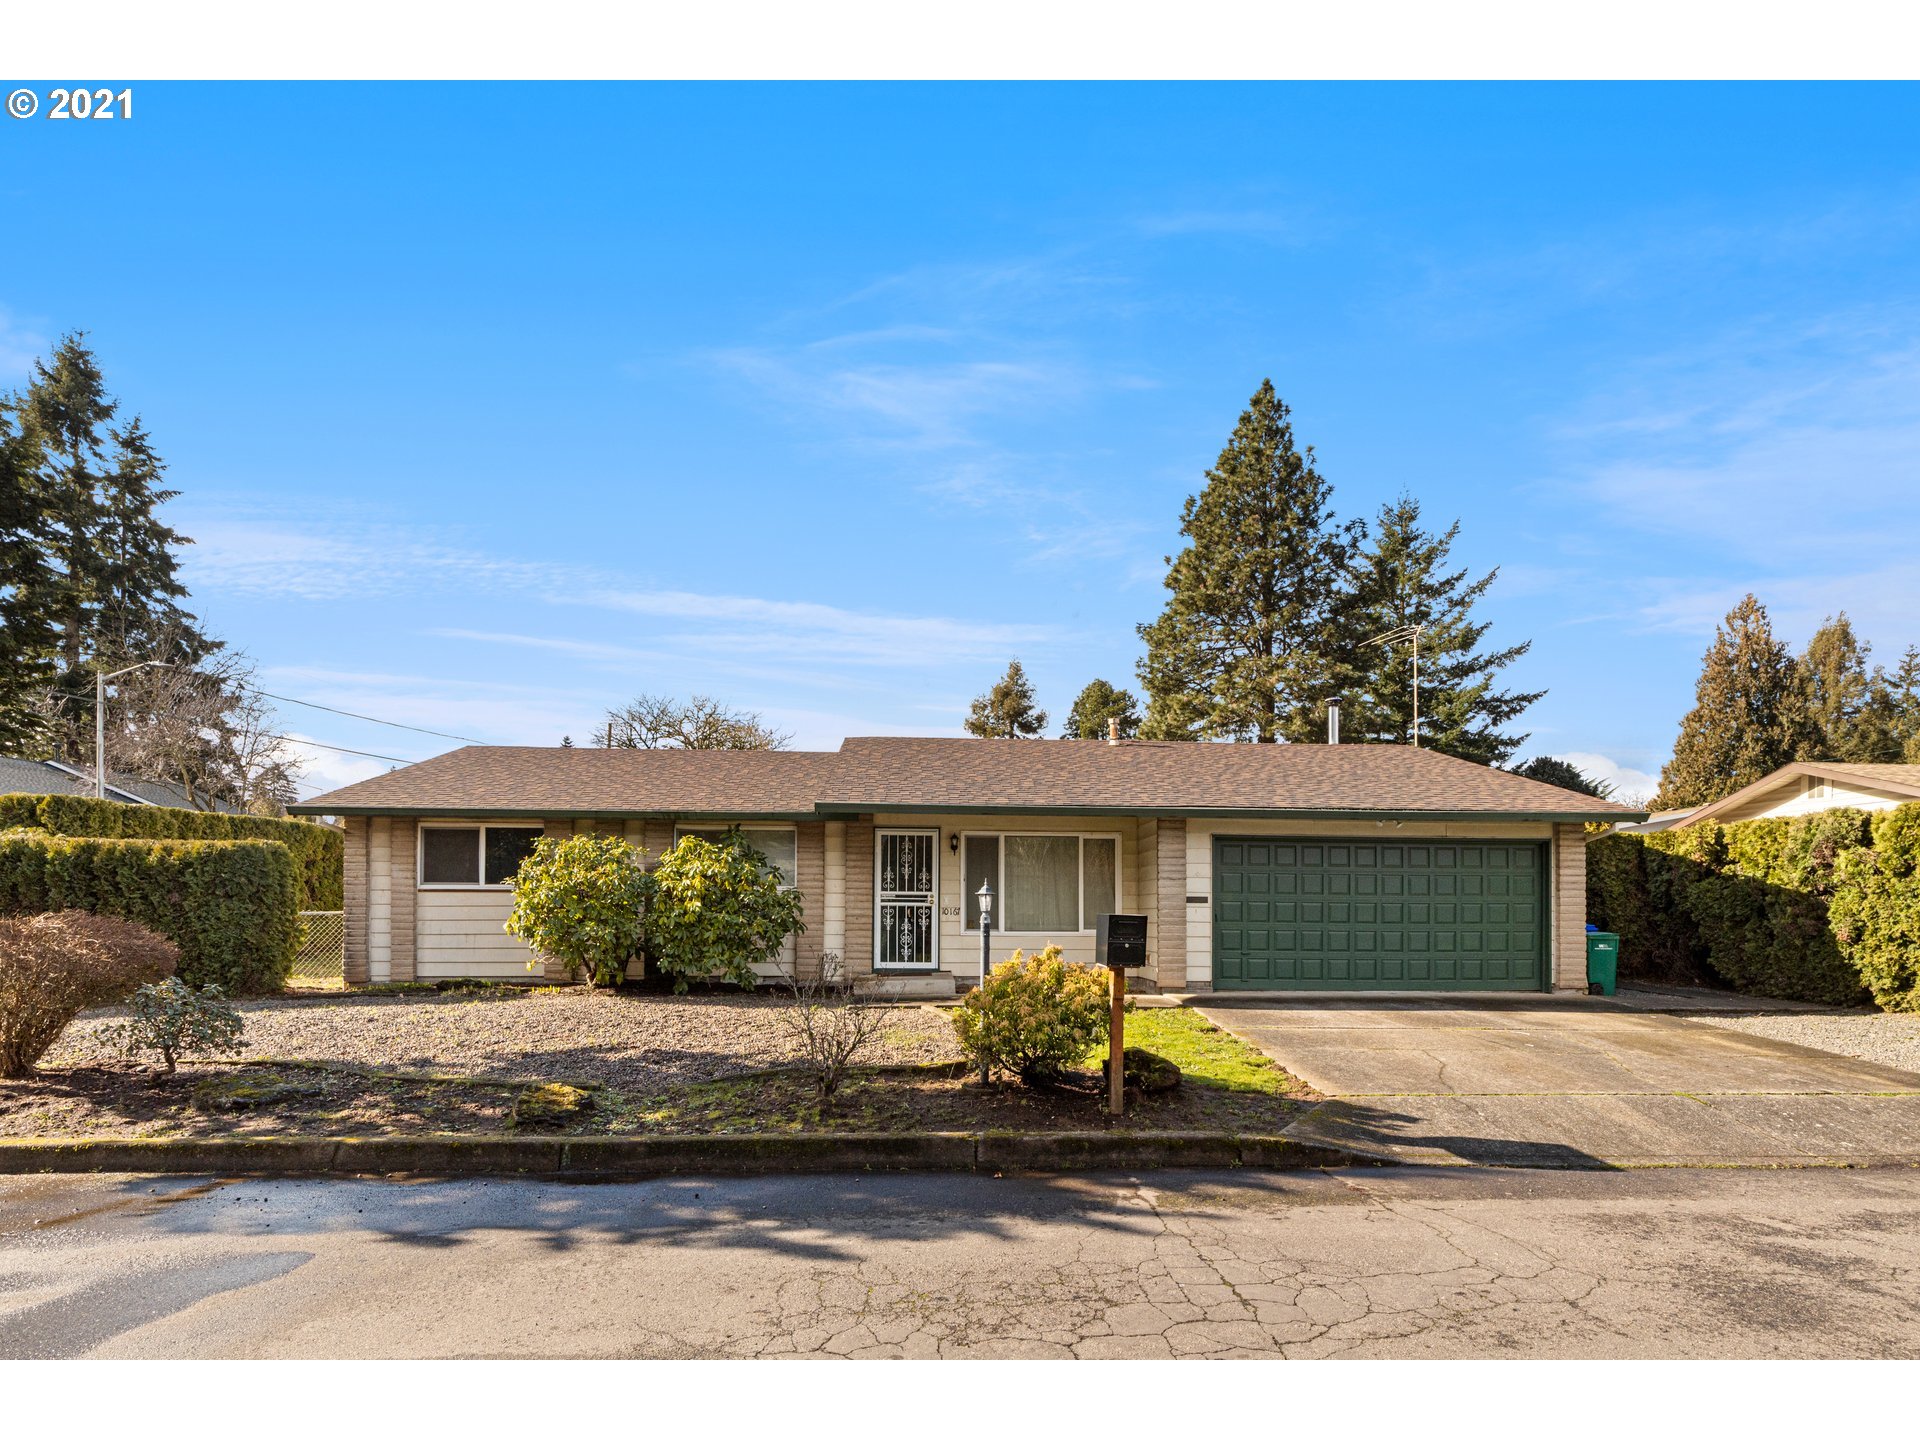 10167 SE 45TH AVE (1 of 24)